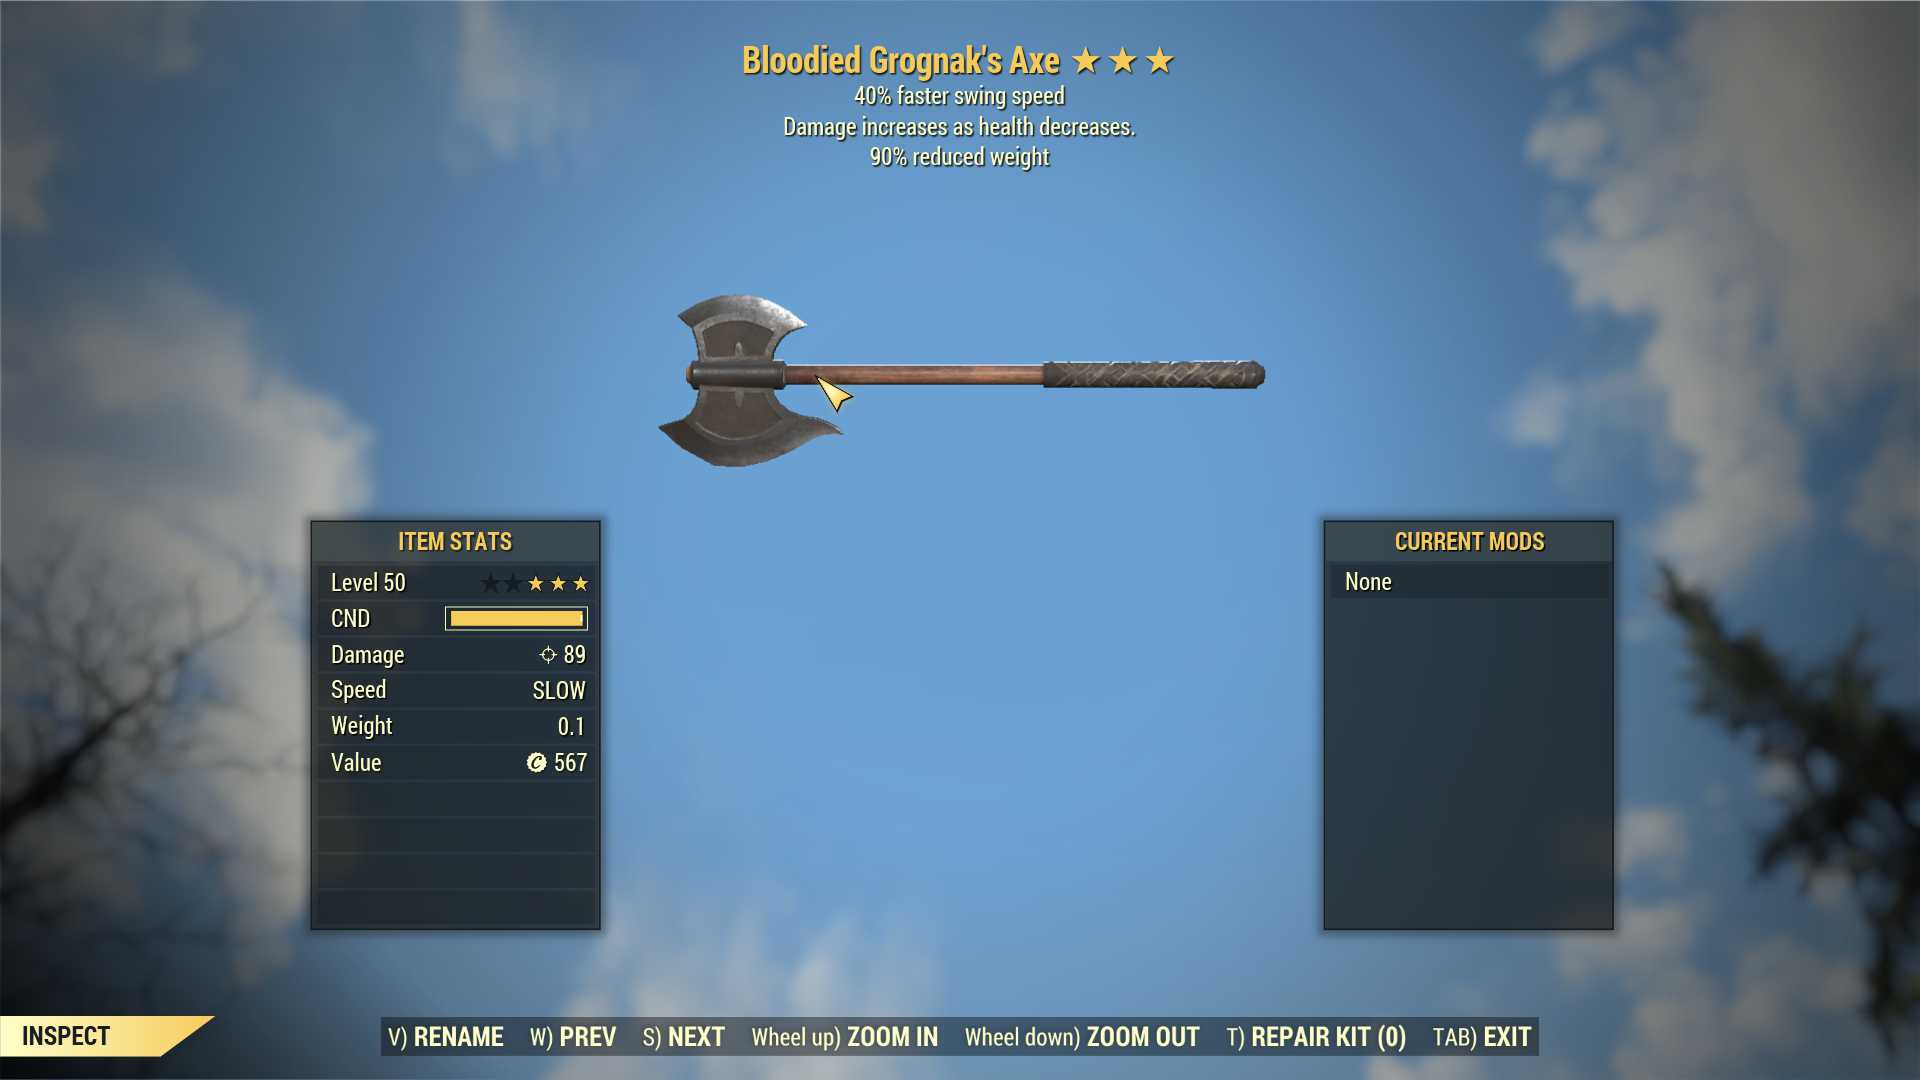 Bloodied Grognak's Axe (40% Faster Swing Speed, 90% reduced weight)